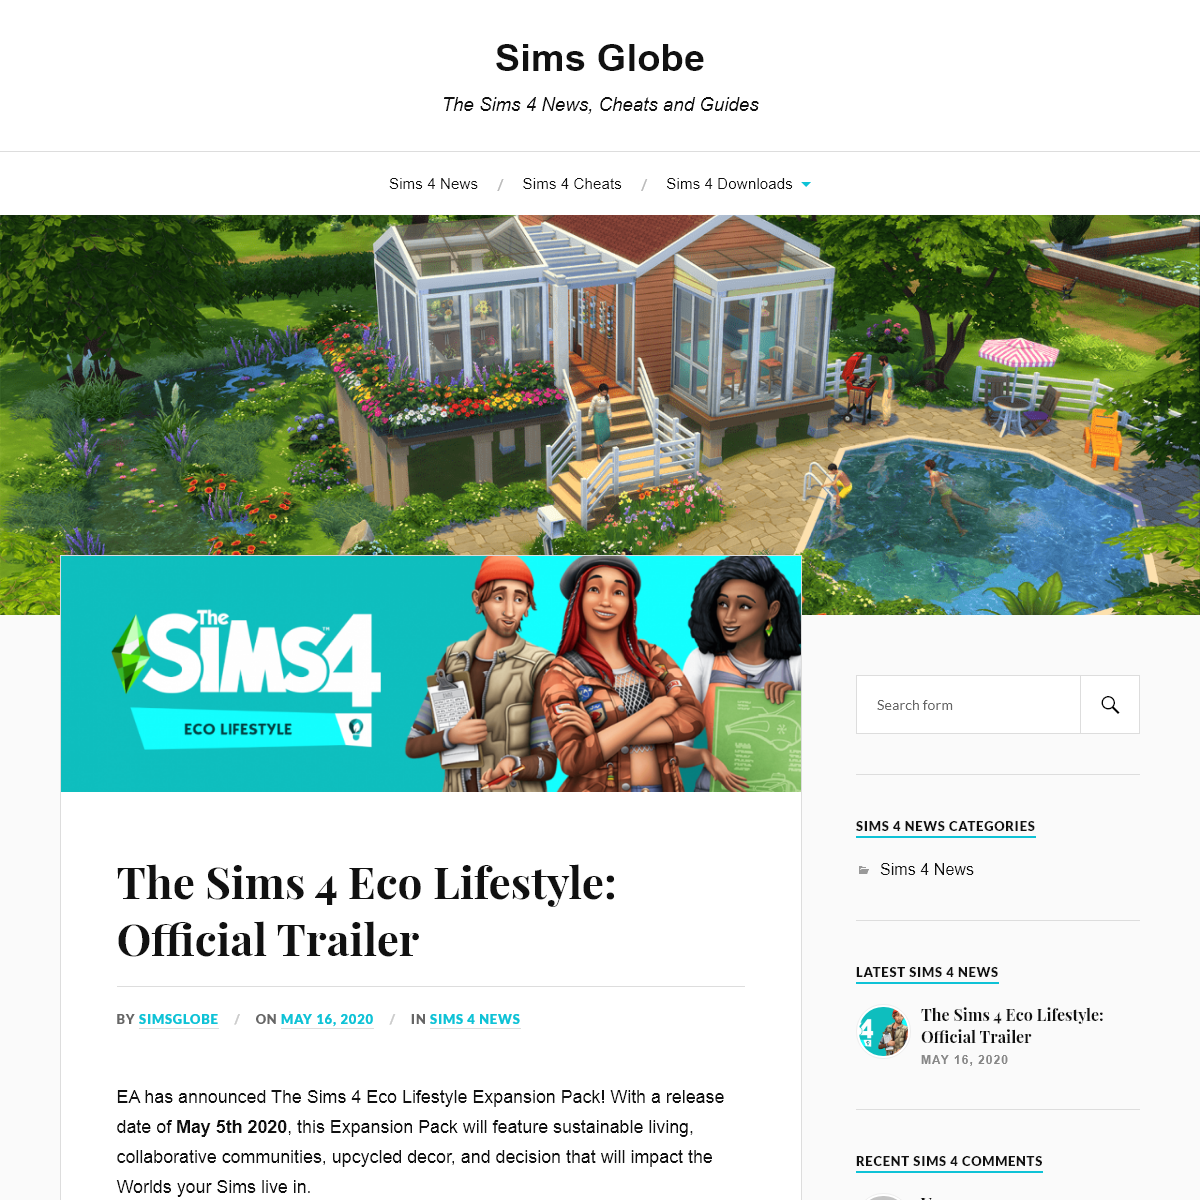 A complete backup of simsglobe.com